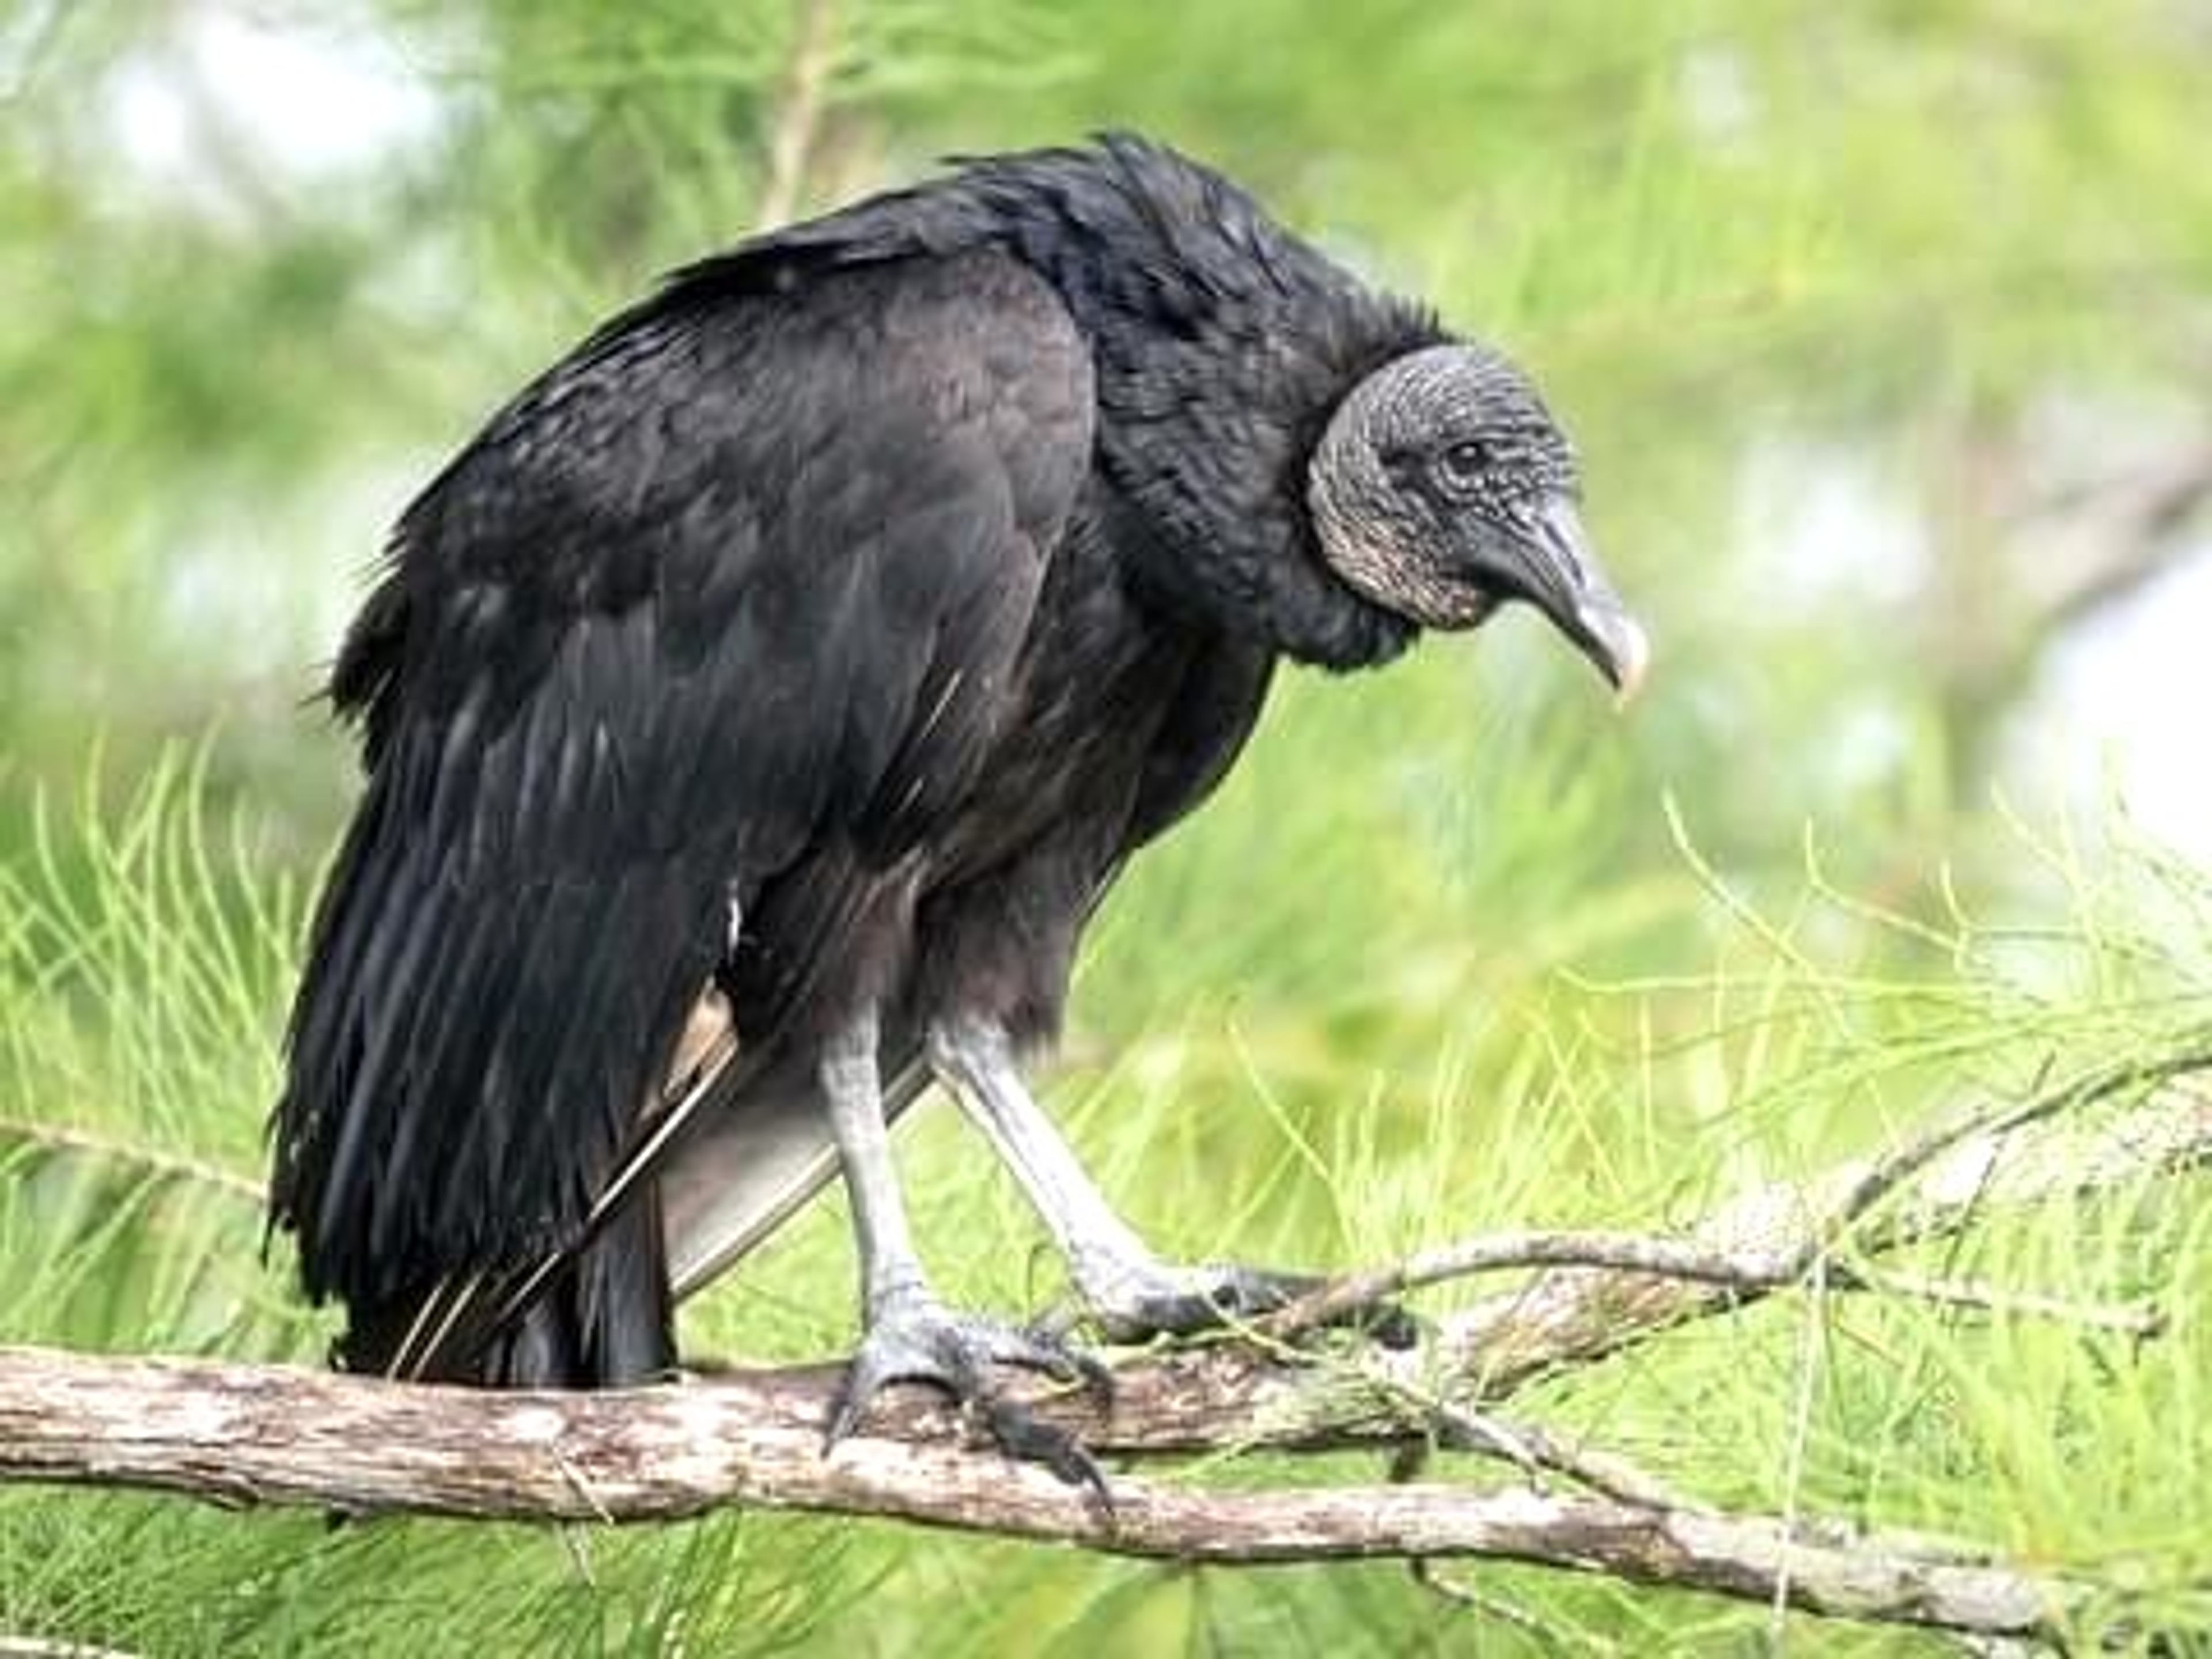 Missouri's black vulture study: How you can help track and manage these birds